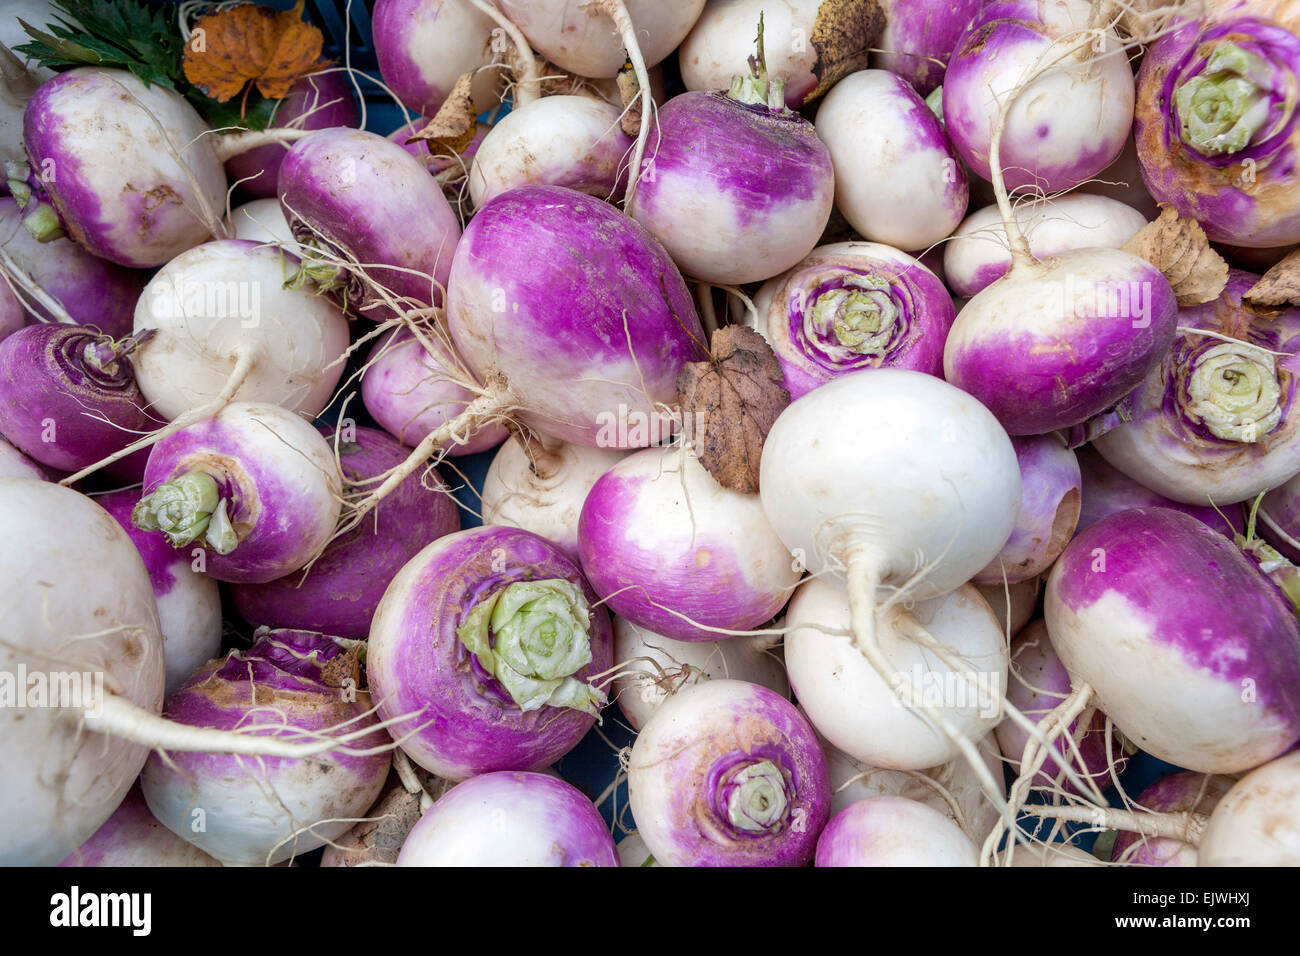 Freshly pulled turnips for sale at a local farmer's market Stock Photo